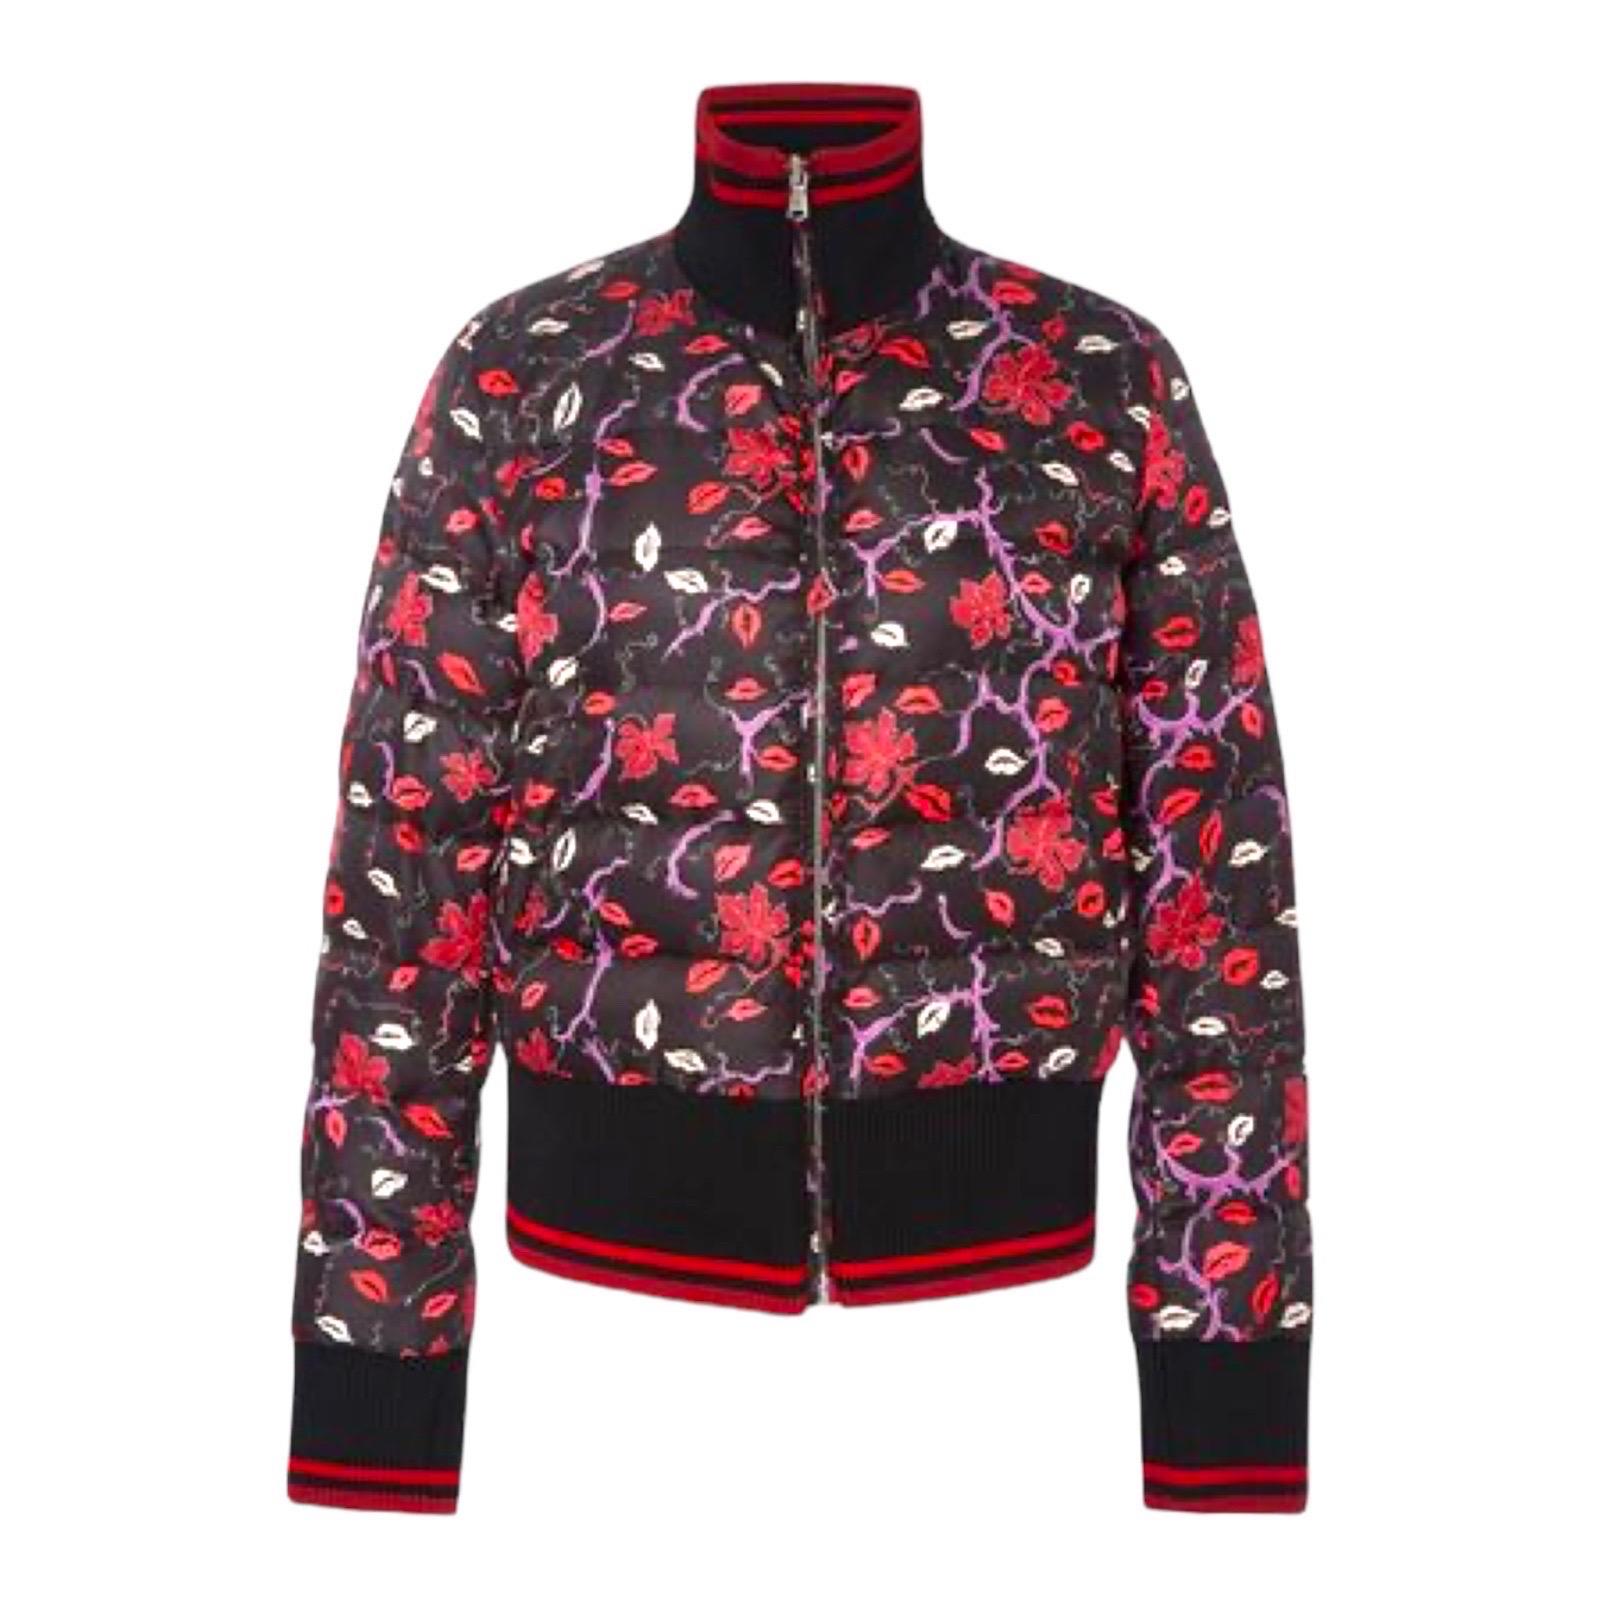 UNWORN Emilio Pucci Lips Signature Print Bomber Outdoor Winter Jacket 42 In Excellent Condition For Sale In Switzerland, CH